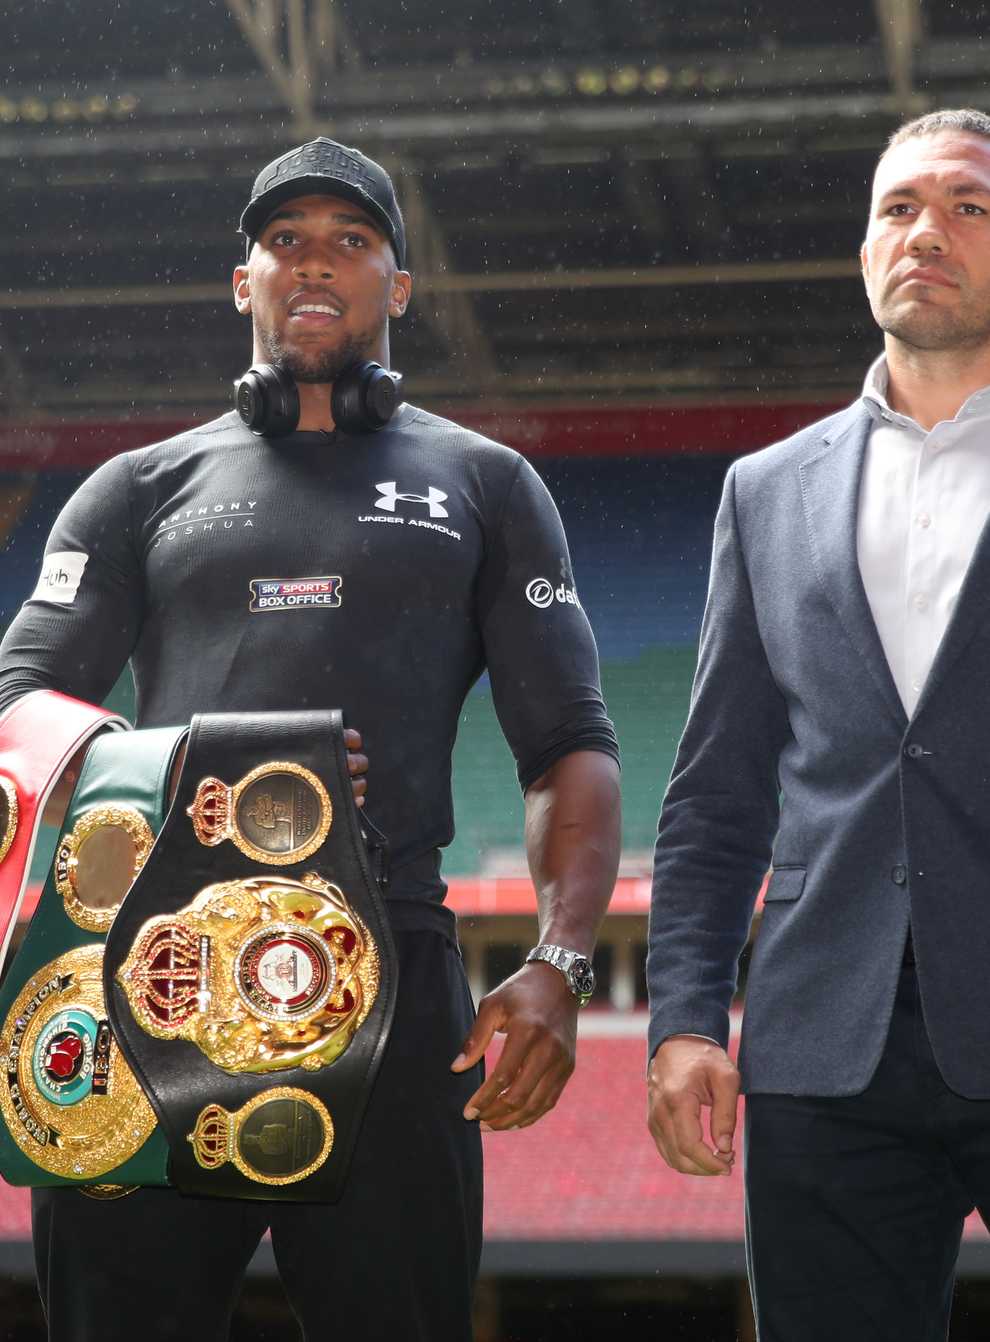 Joshua and Pulev will face off in London on December 12